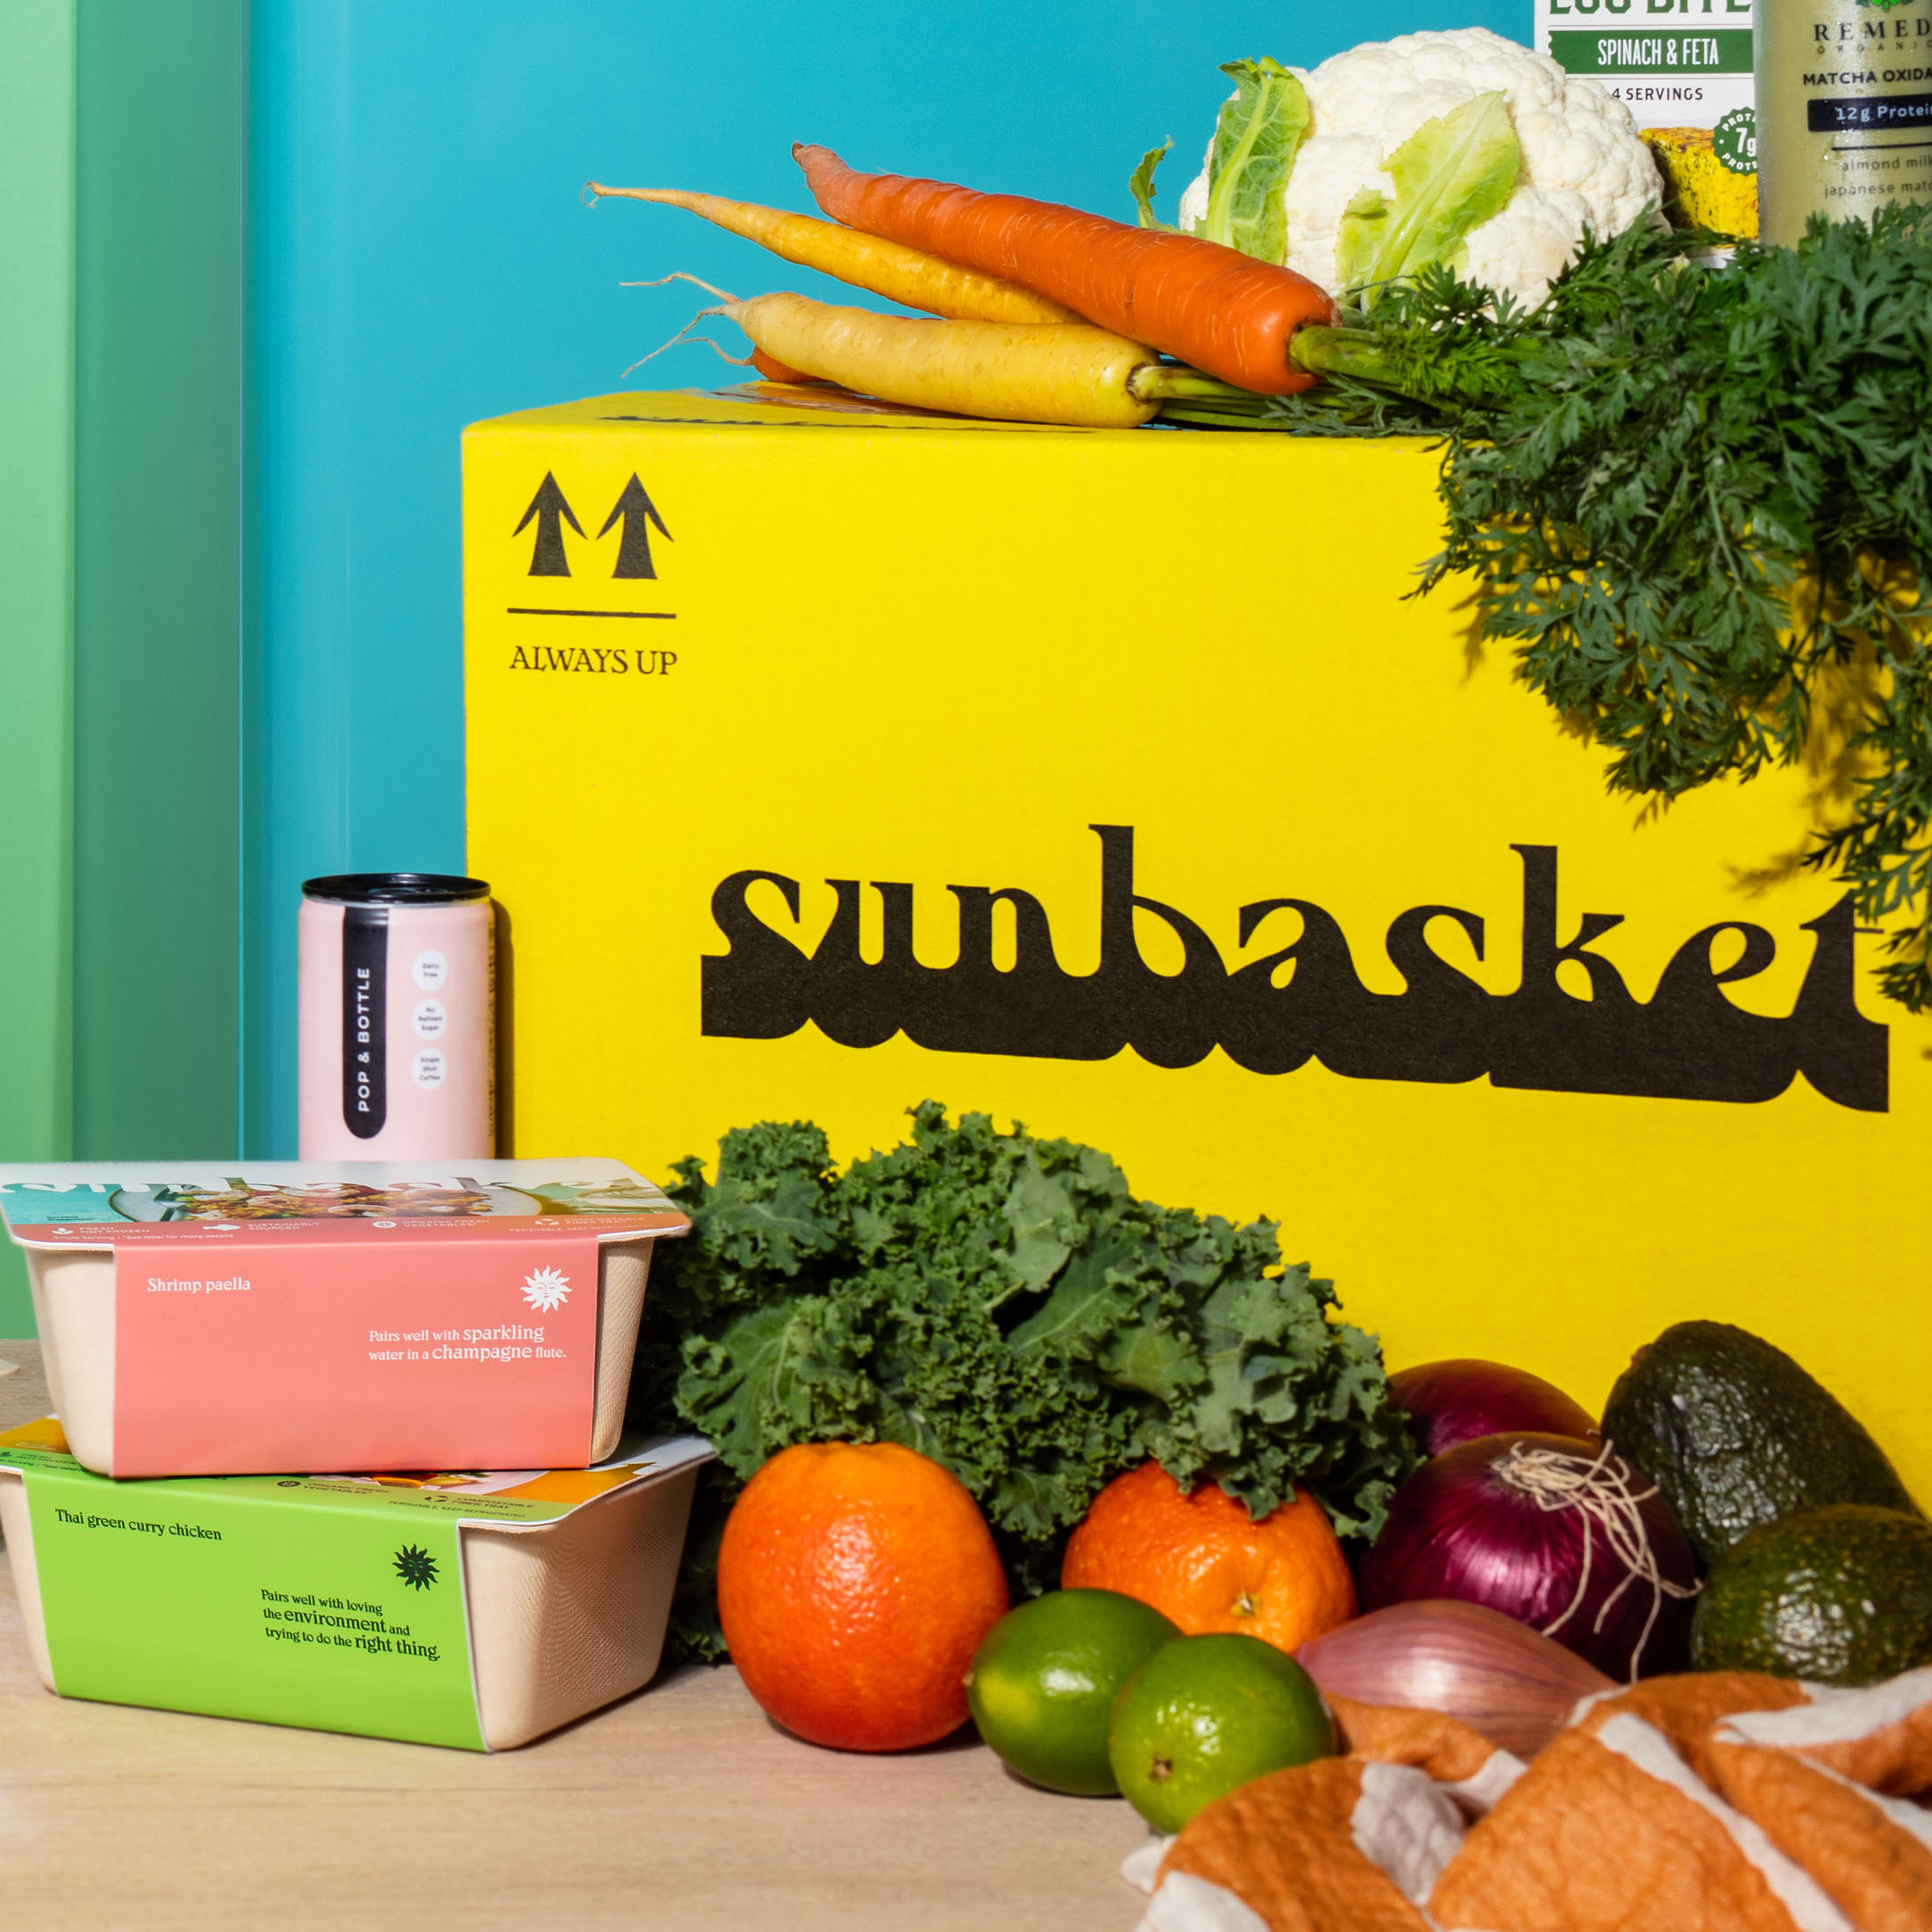 5 Best Food Delivery Services for Families: Sunbasket